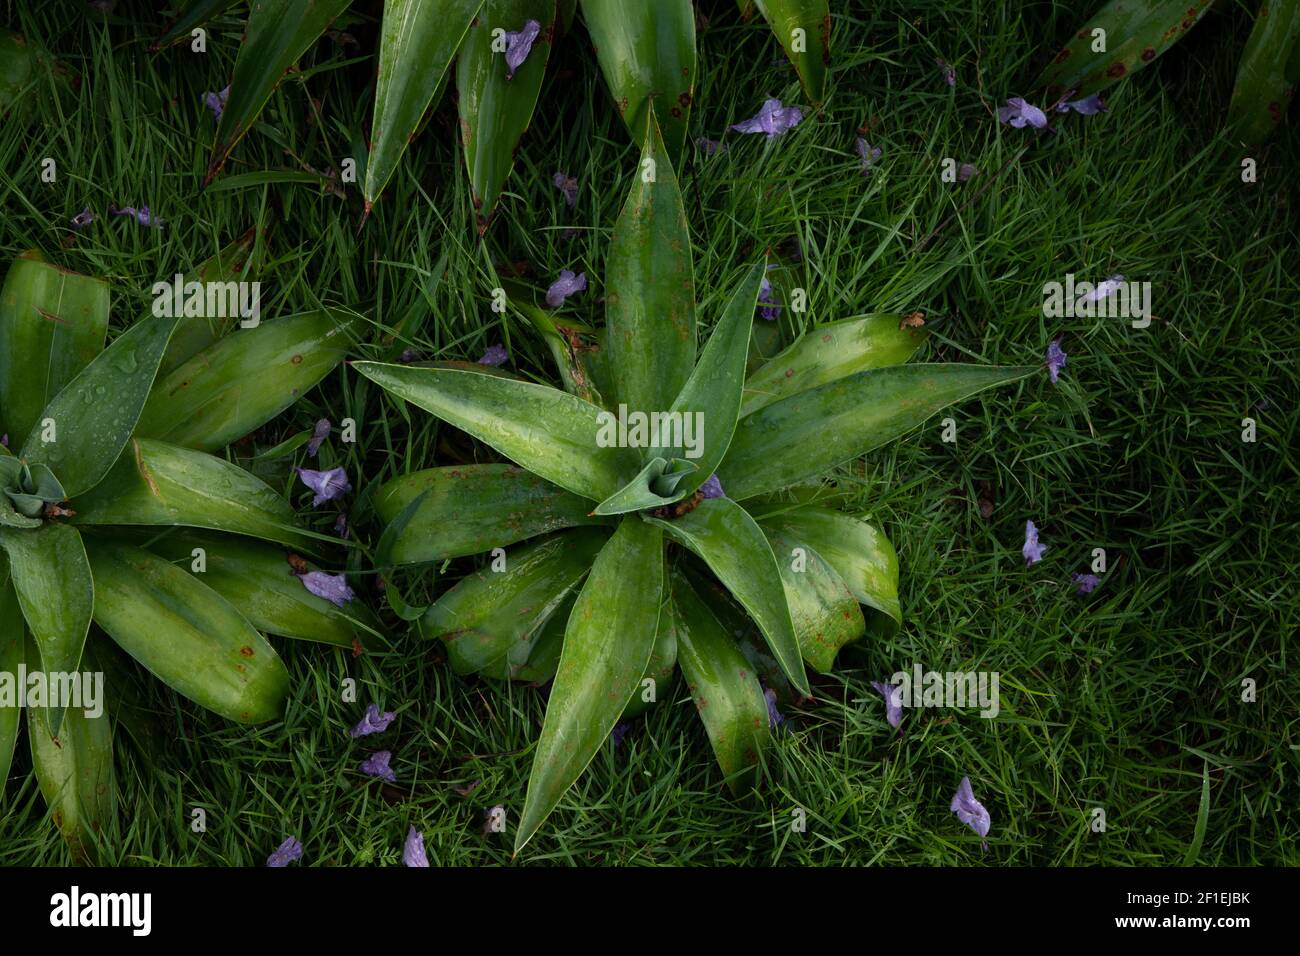 Top view of green bromeliads and purple flowers, with grass background Stock Photo